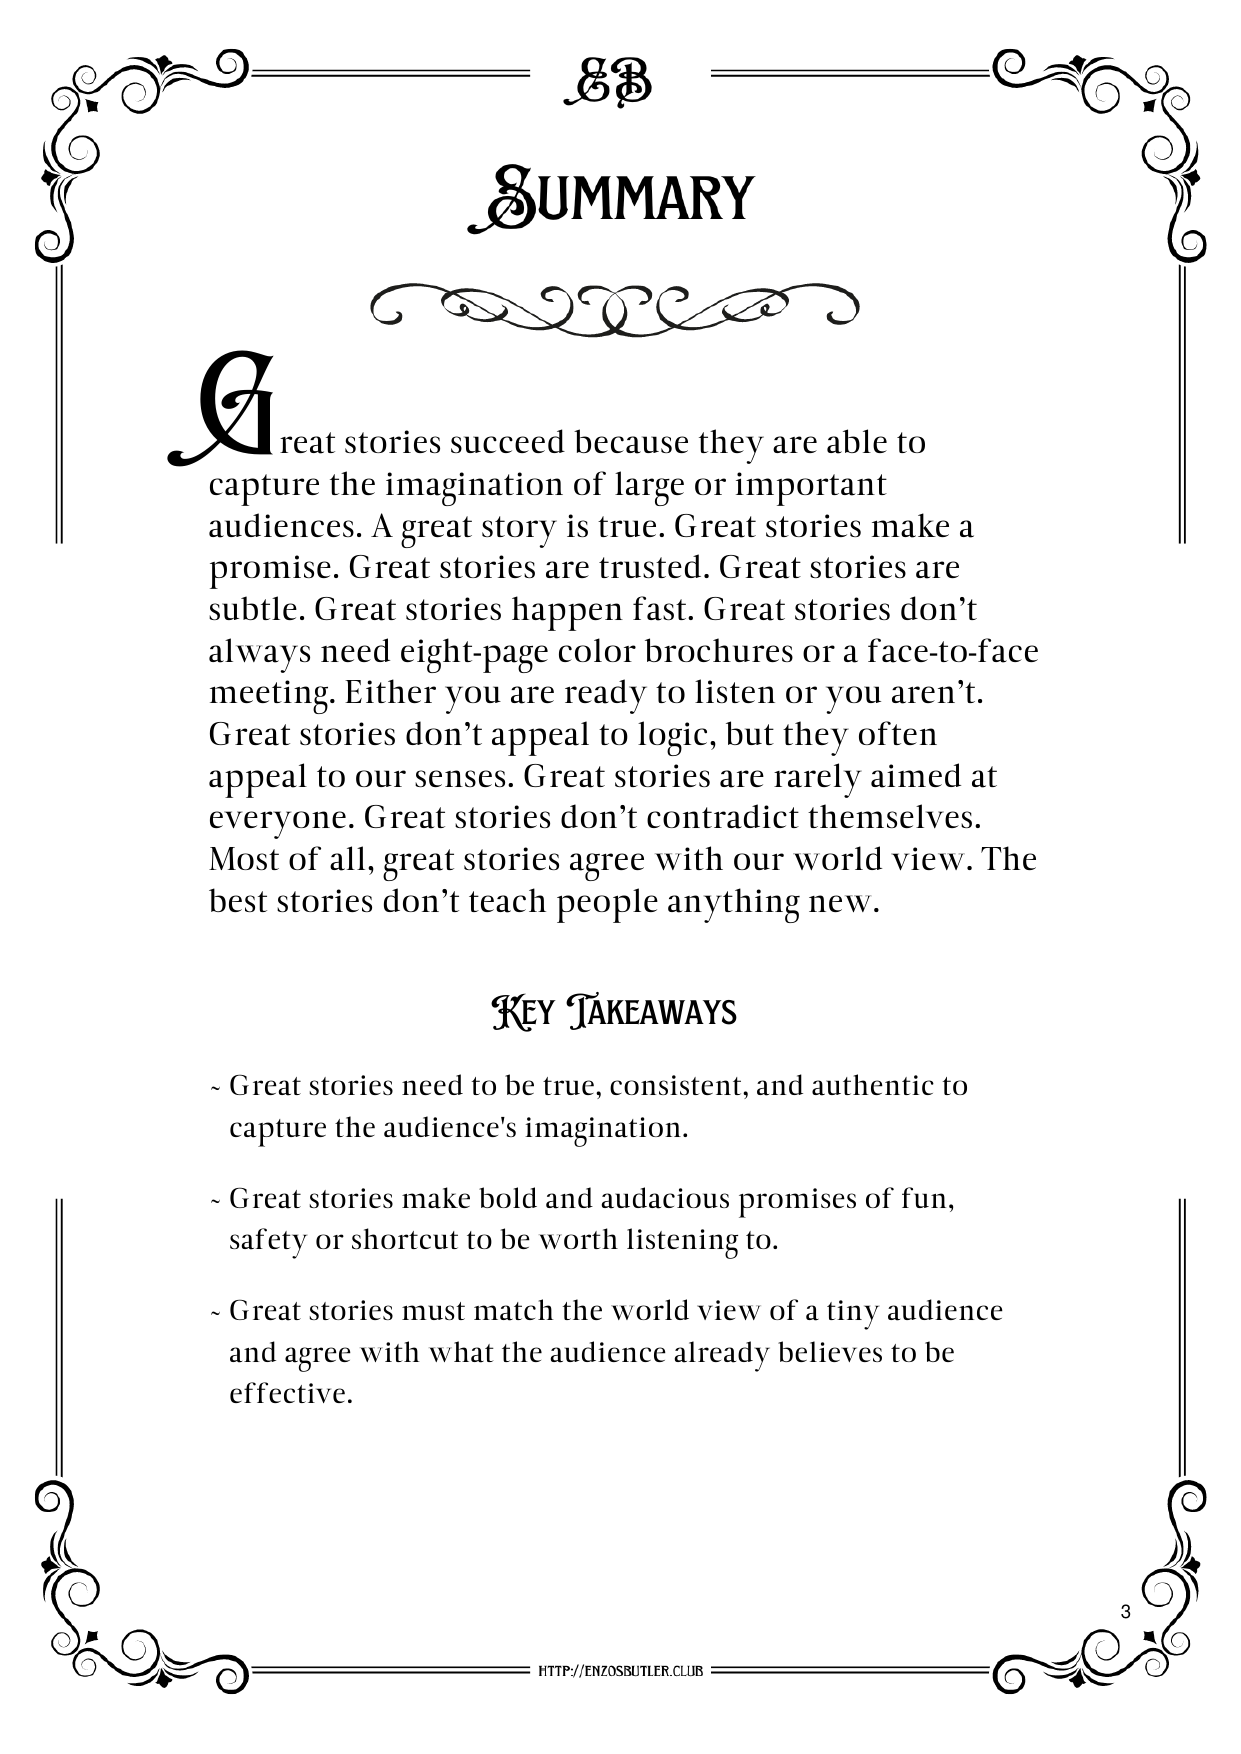 Ode: How to tell a great story by Seth Godin ~ English Worksheet